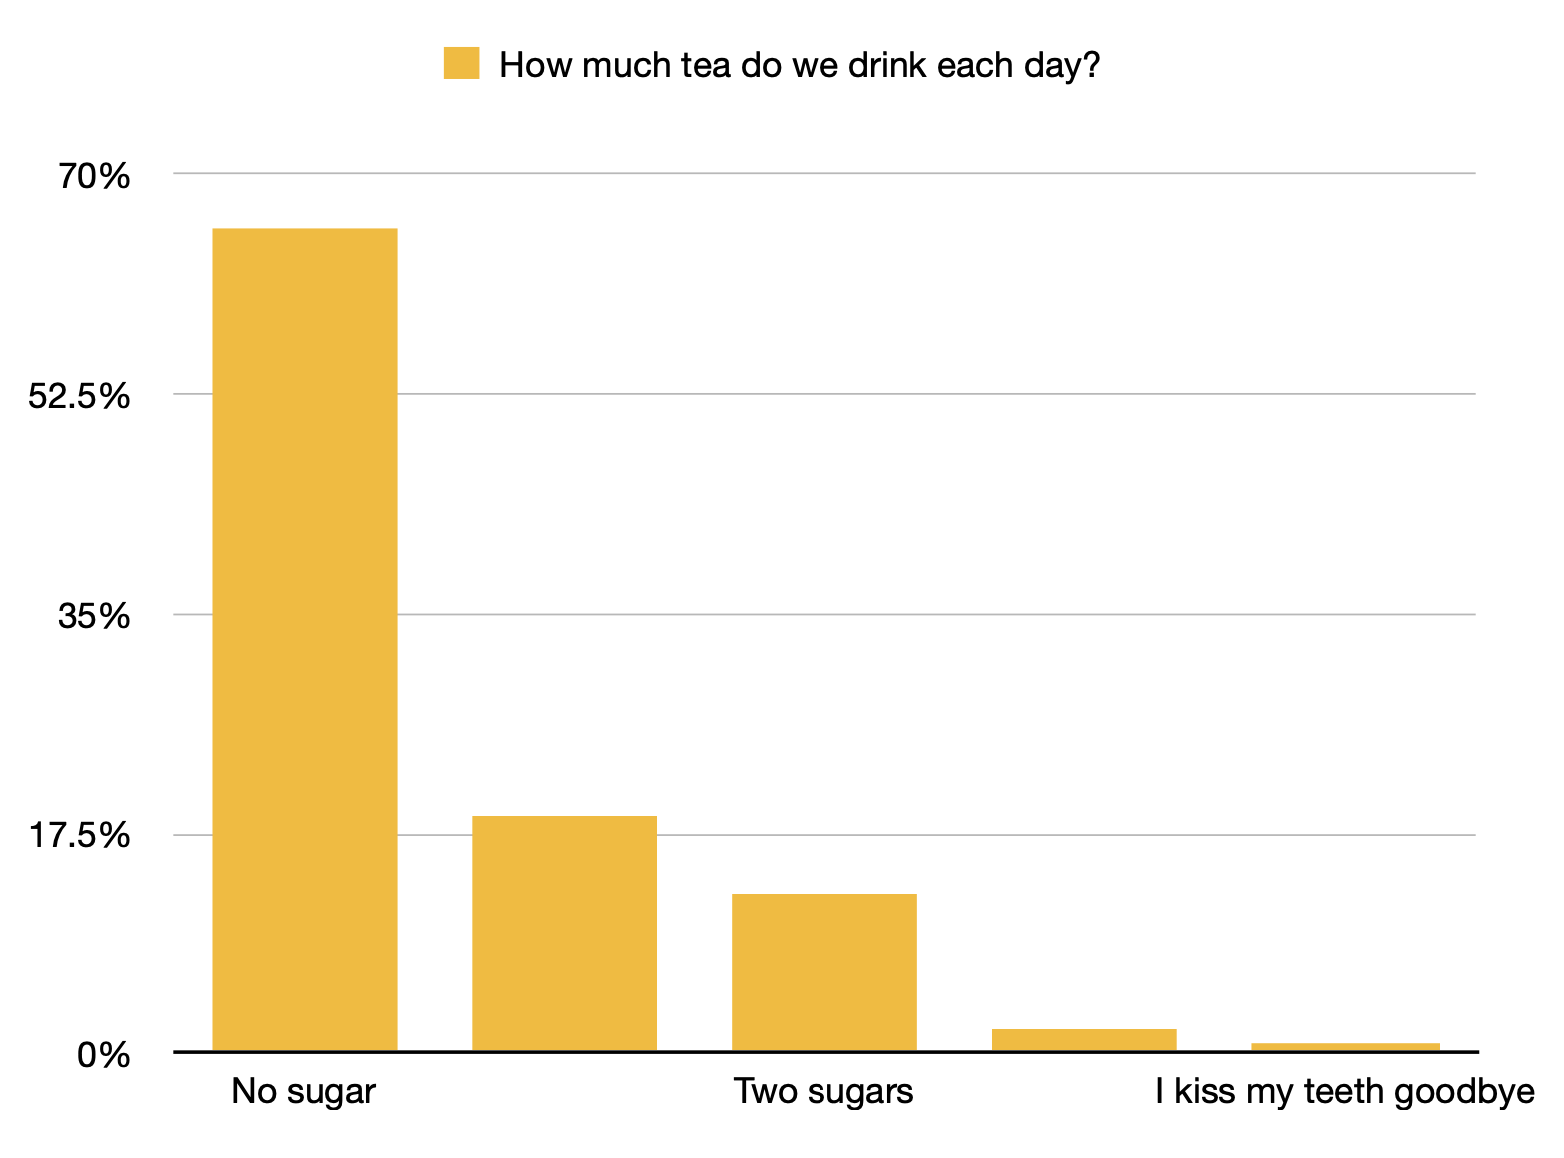 How much sugar do you take with your tea